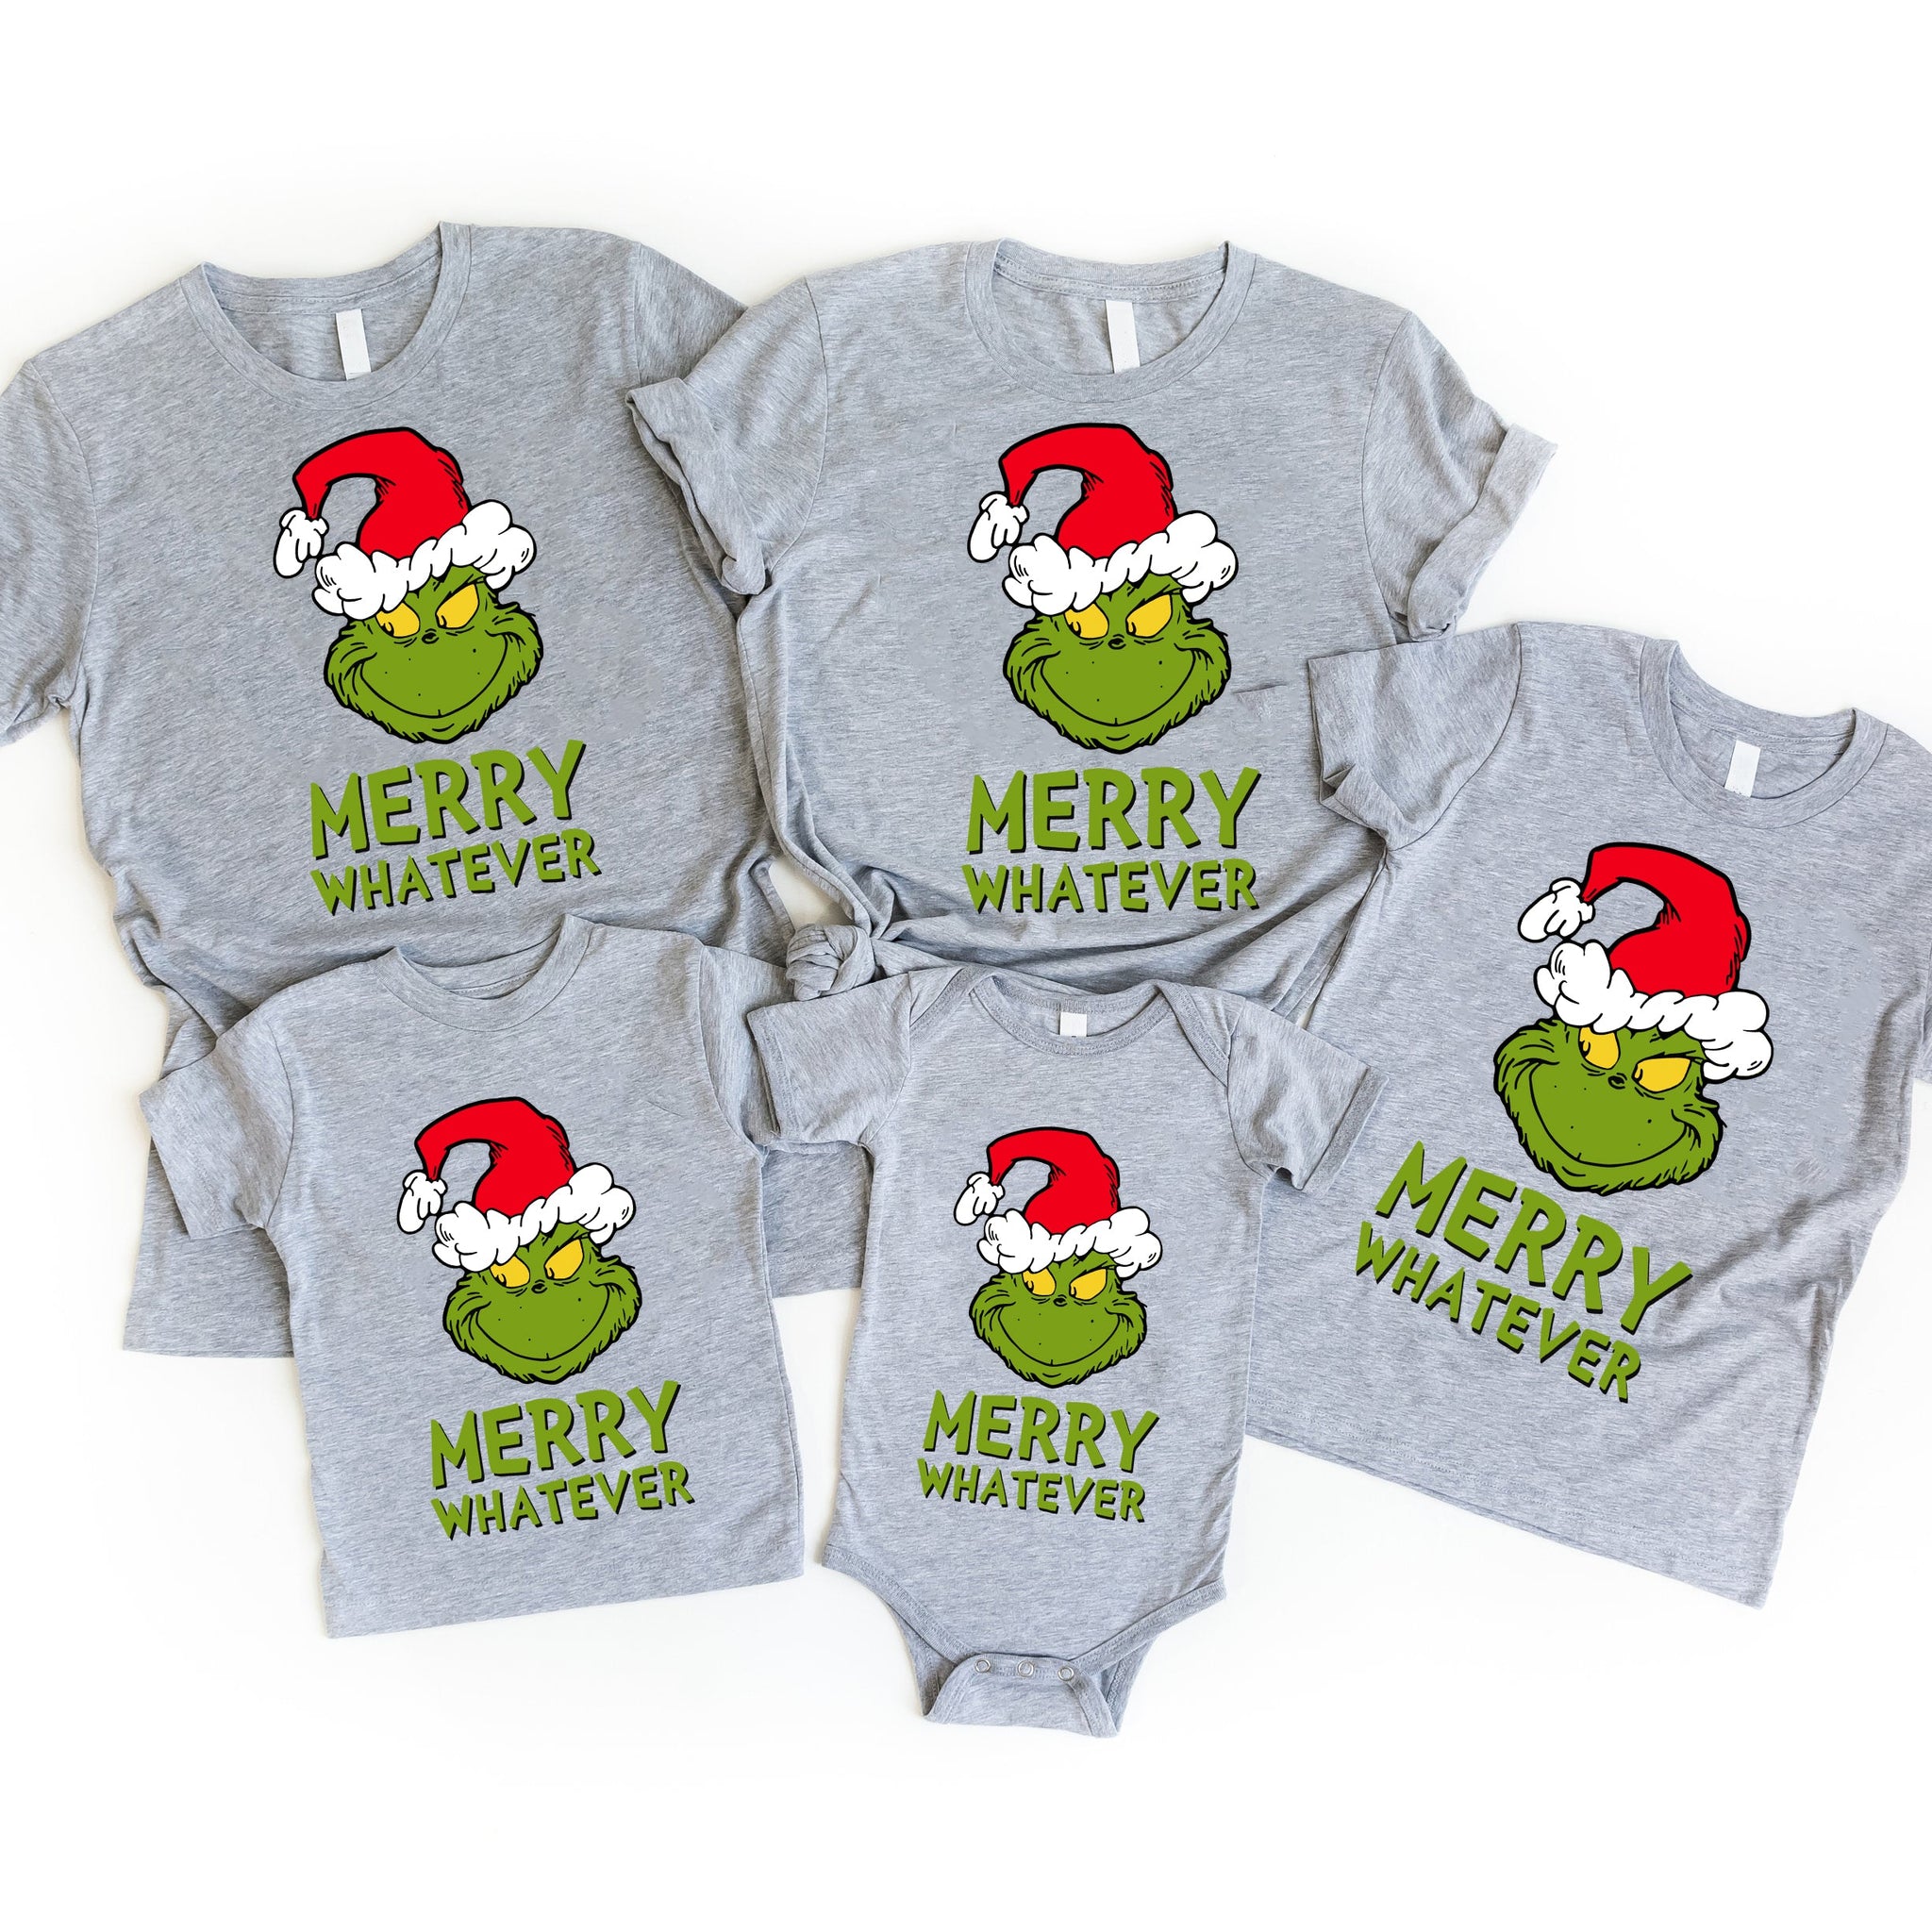 Family Christmas Matching Pajamas Tops 'Merry Whatever' Letter Print Casual Short Sleeve T-shirts Gray Color With Dog Bandana